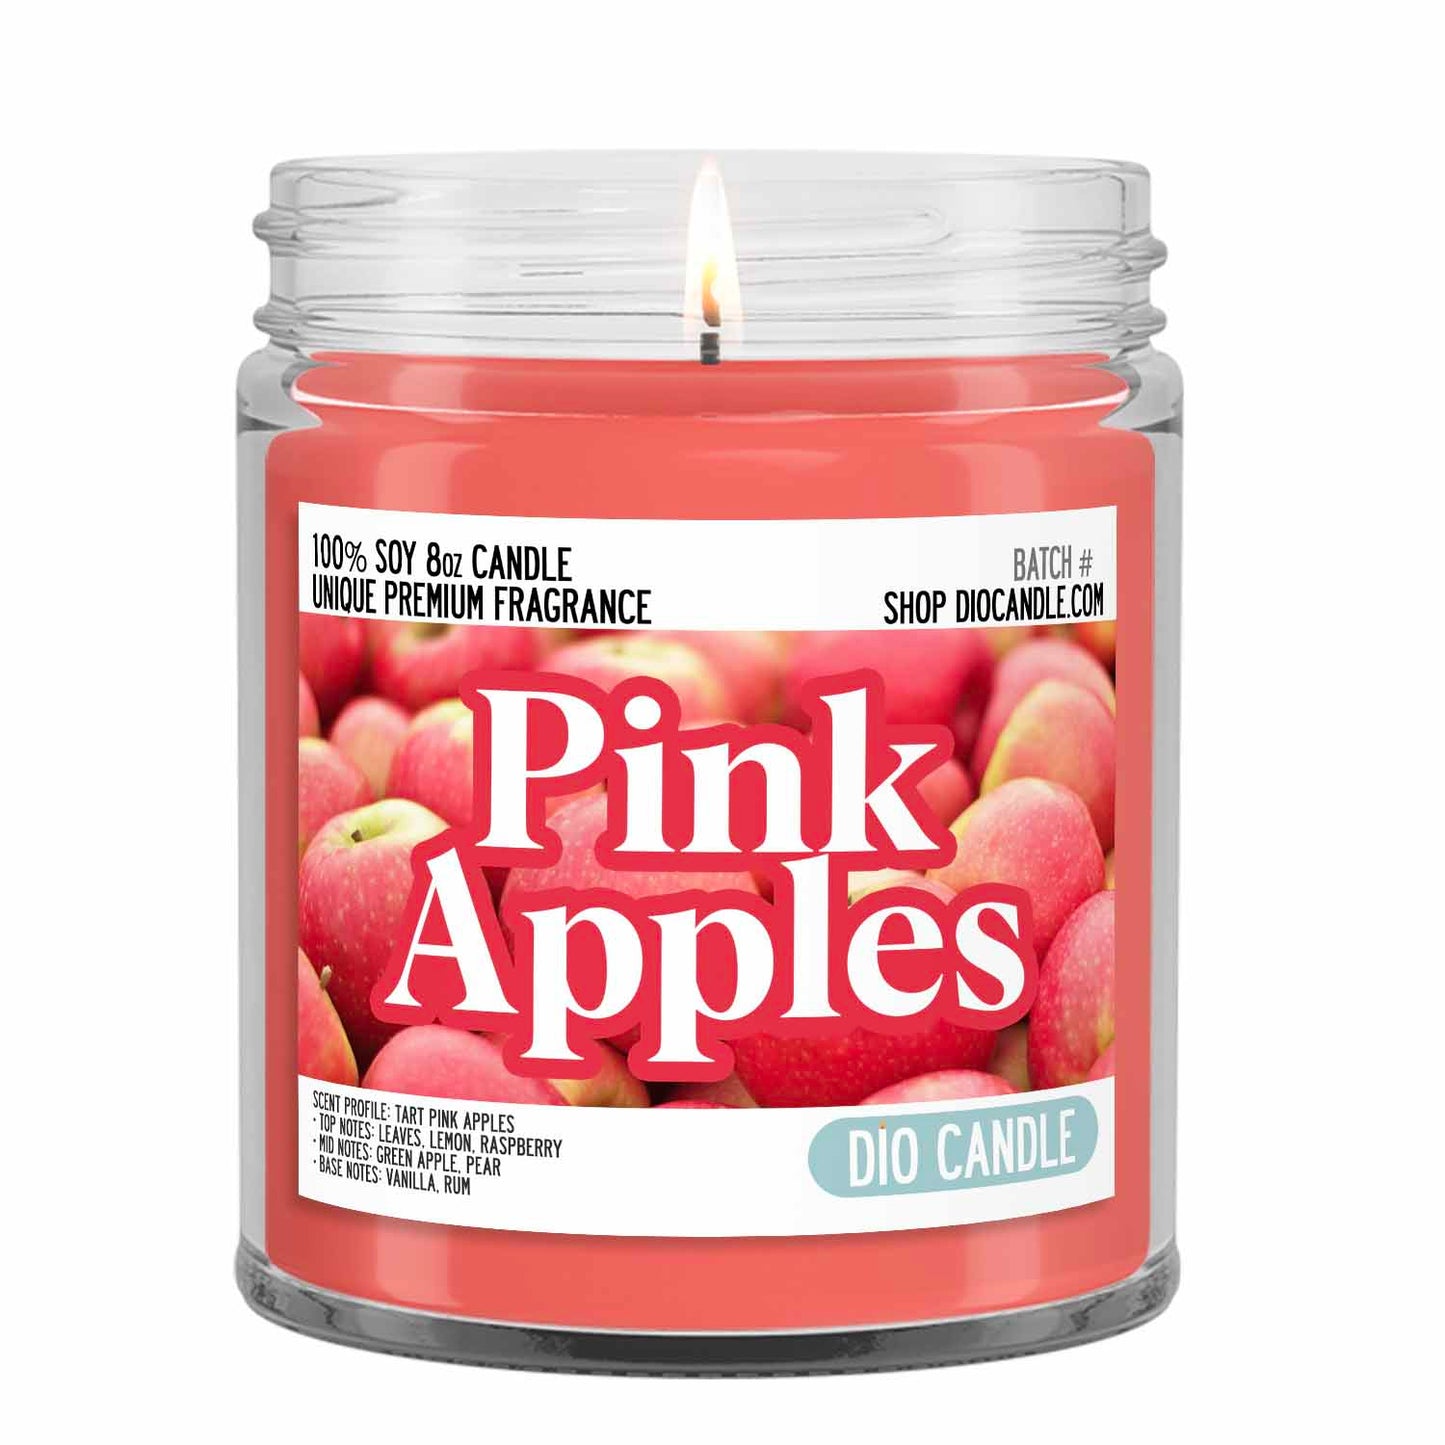 Pink Apples Candle